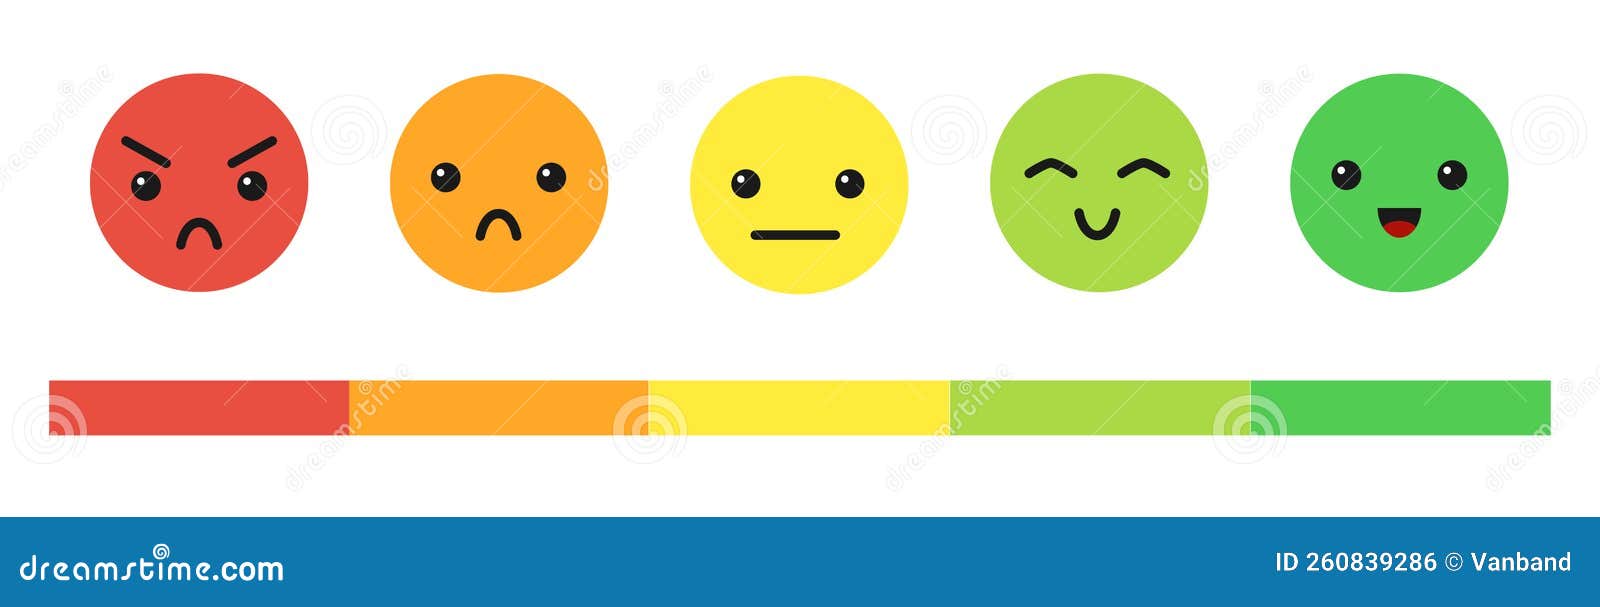 Emoji Faces Icon Set Green Red Levels Mood Scale Stock Vector ...